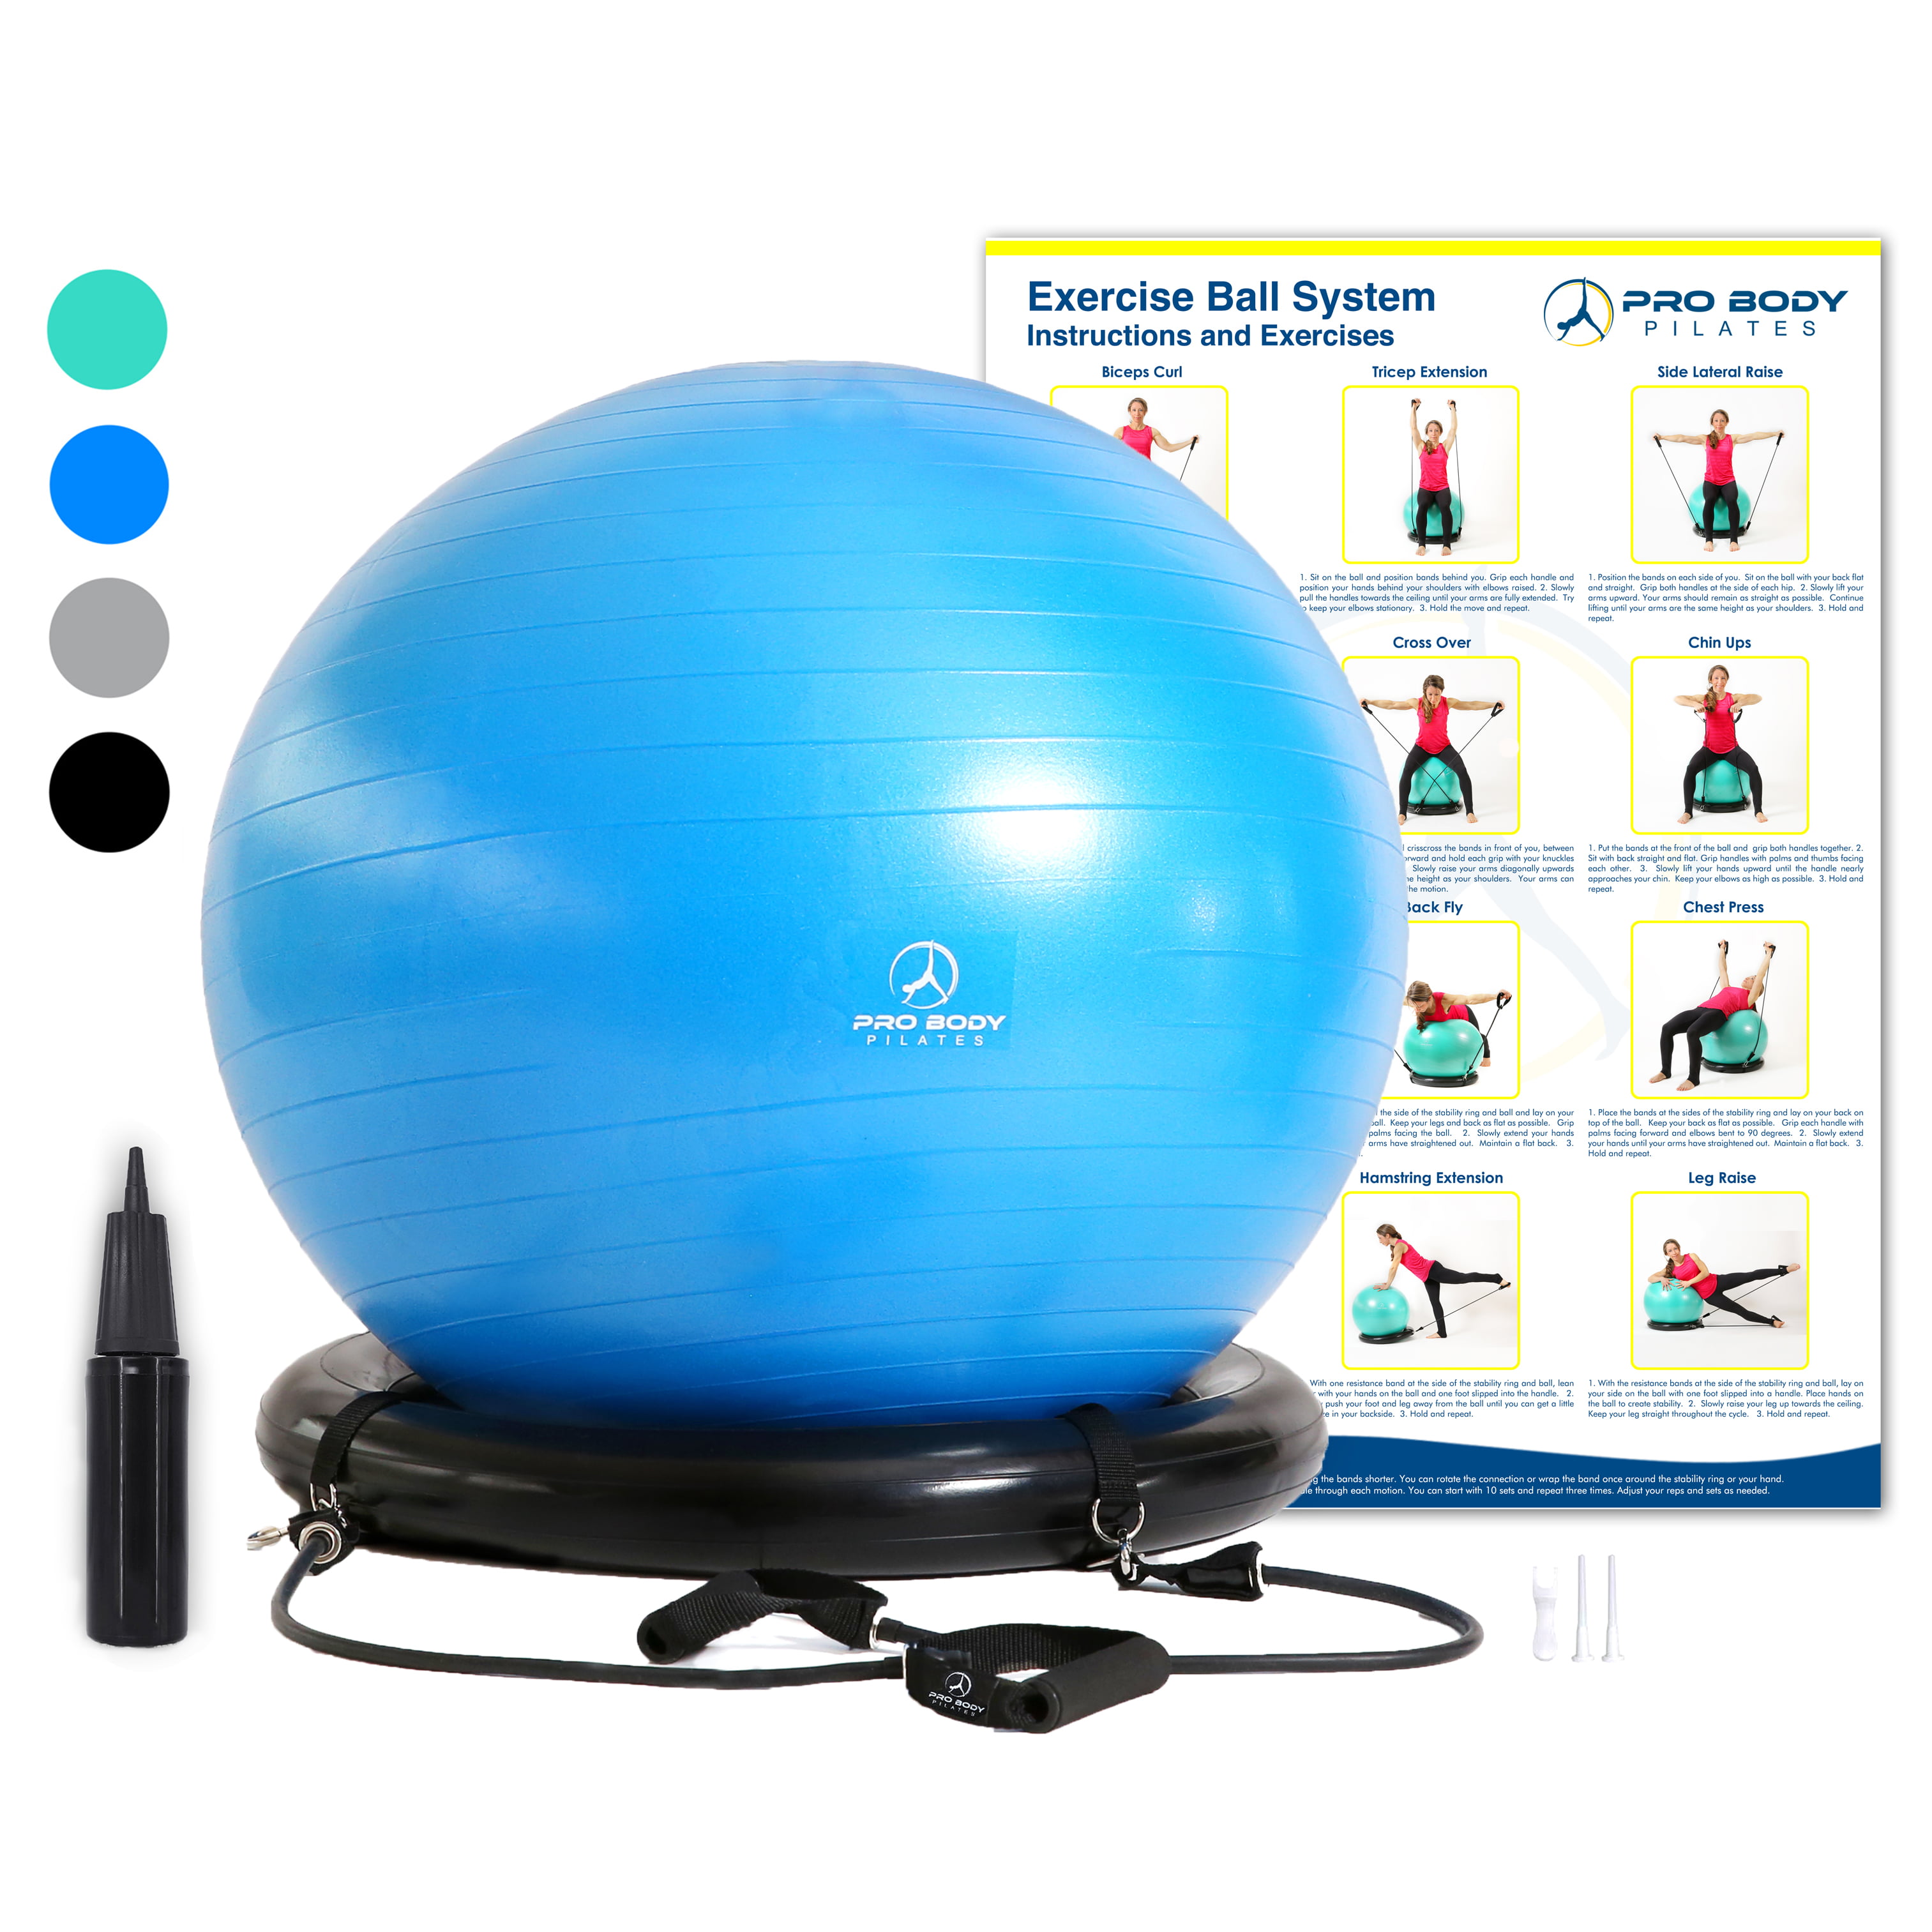 Exercise Ball Yoga Ball Stability Gym Fitness Workout Home Office Ball Chair